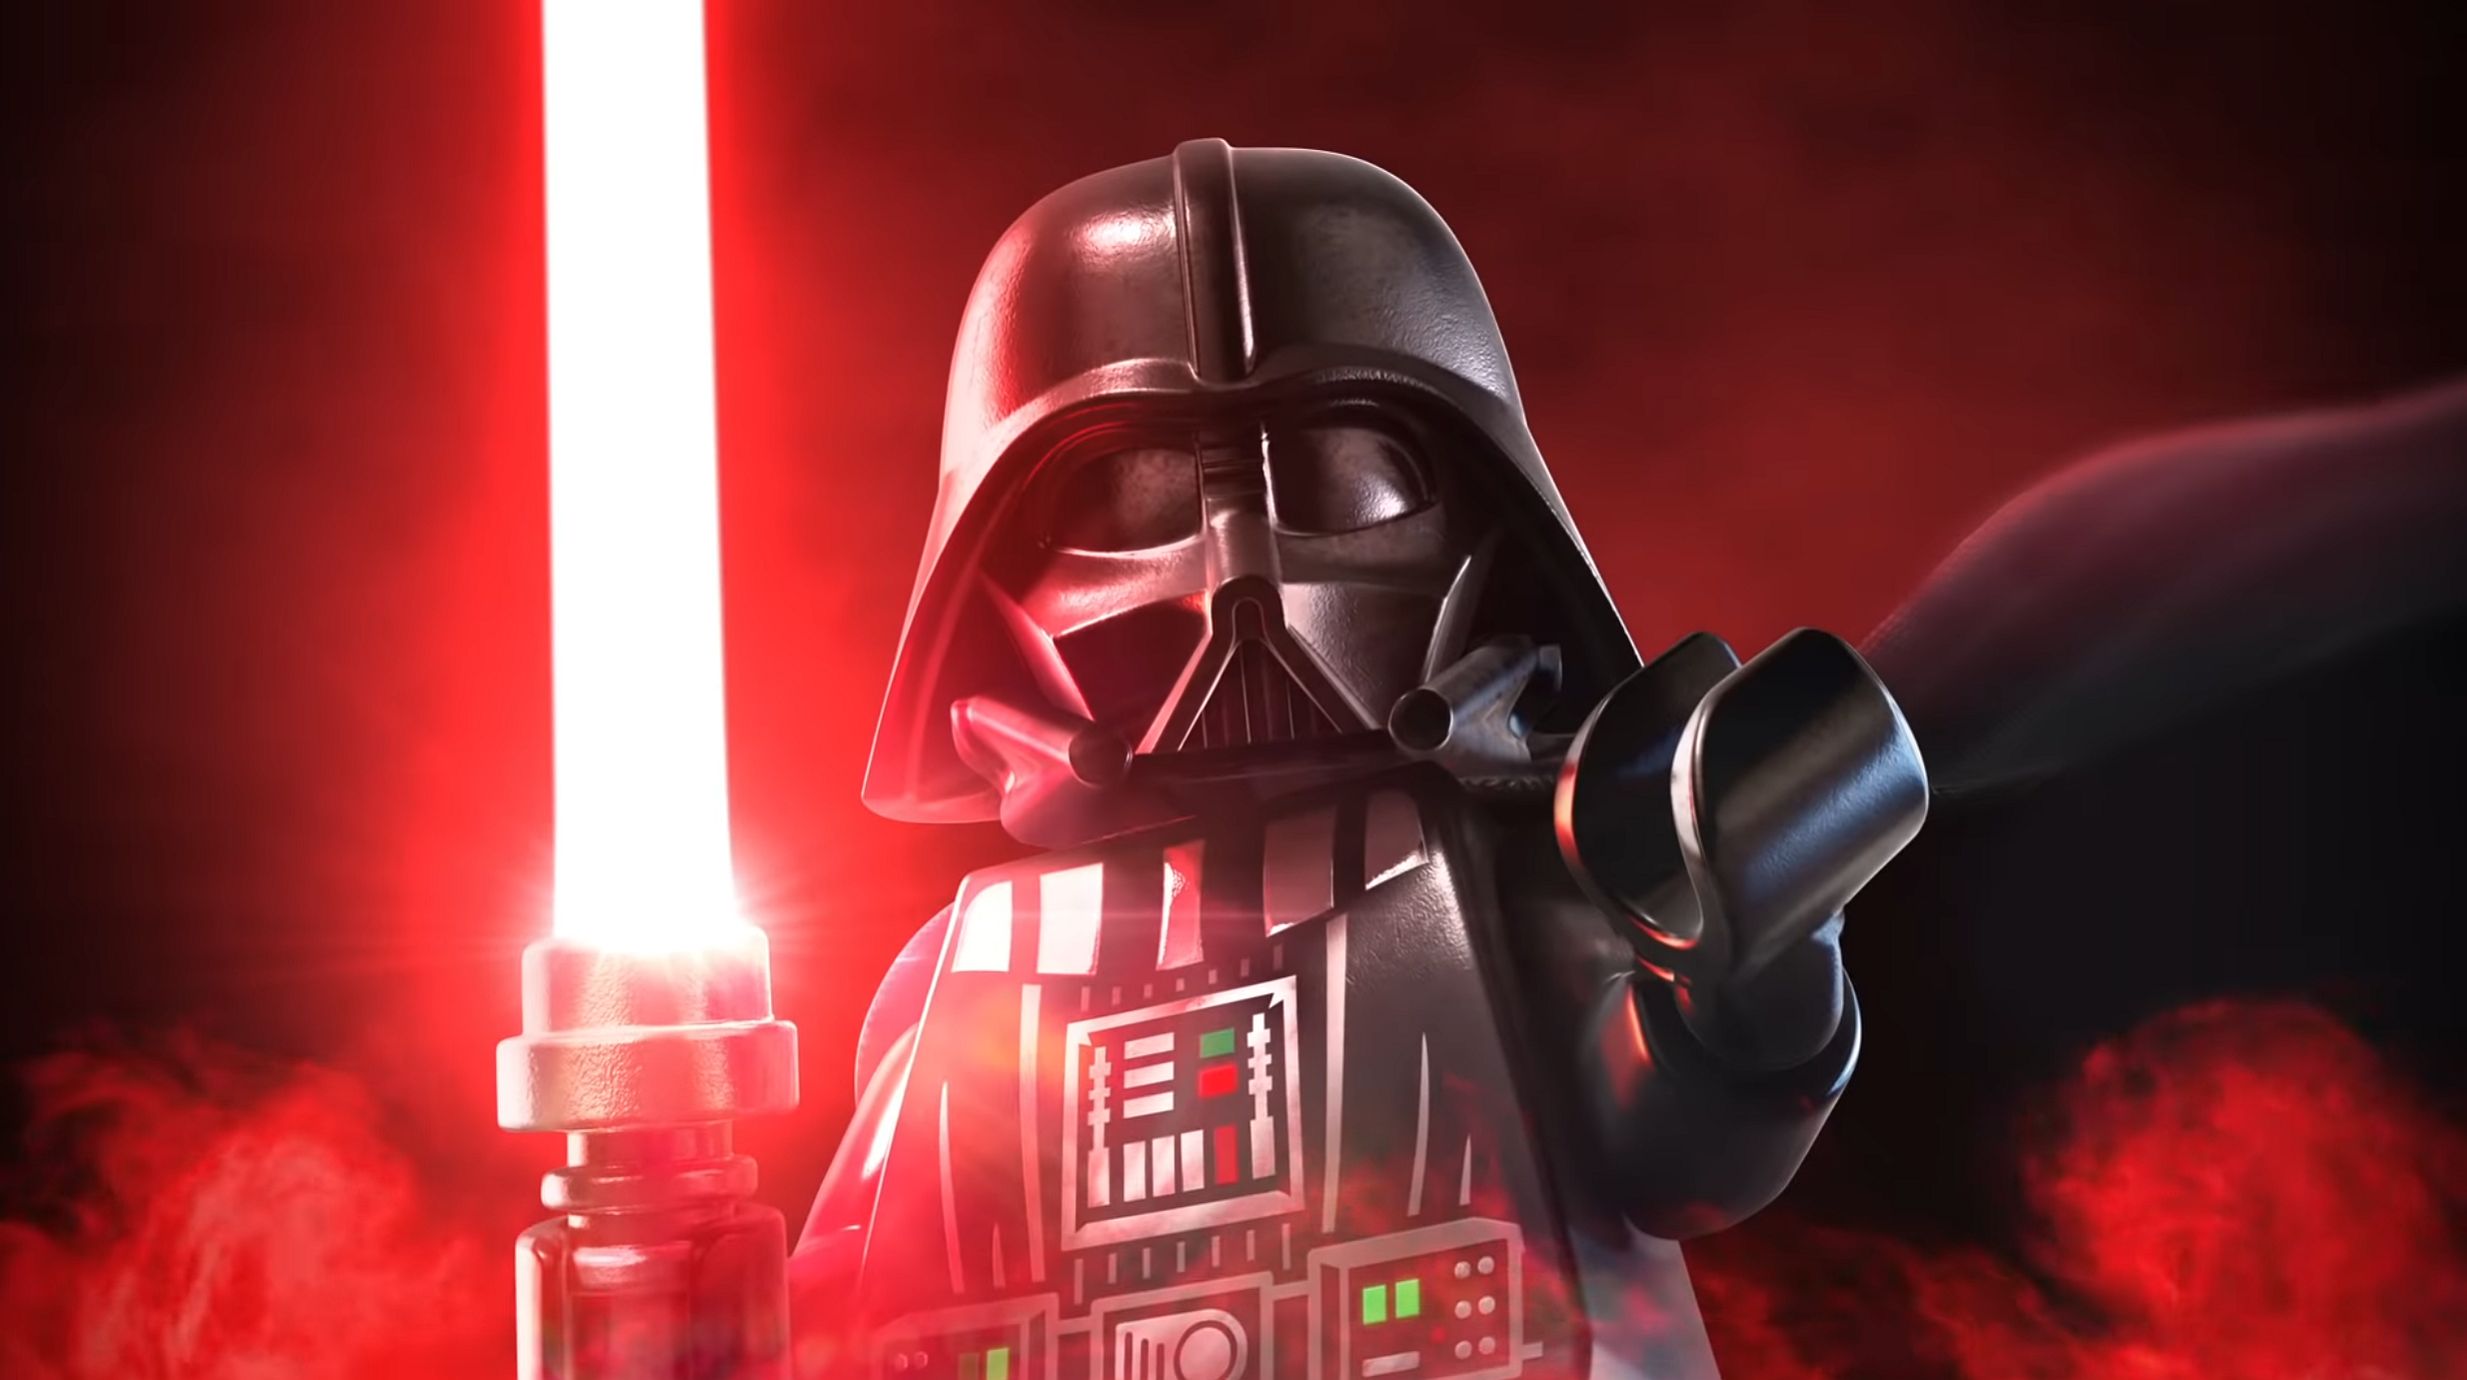 Image for Lego Star Wars: The Skywalker Saga is out now on all platforms